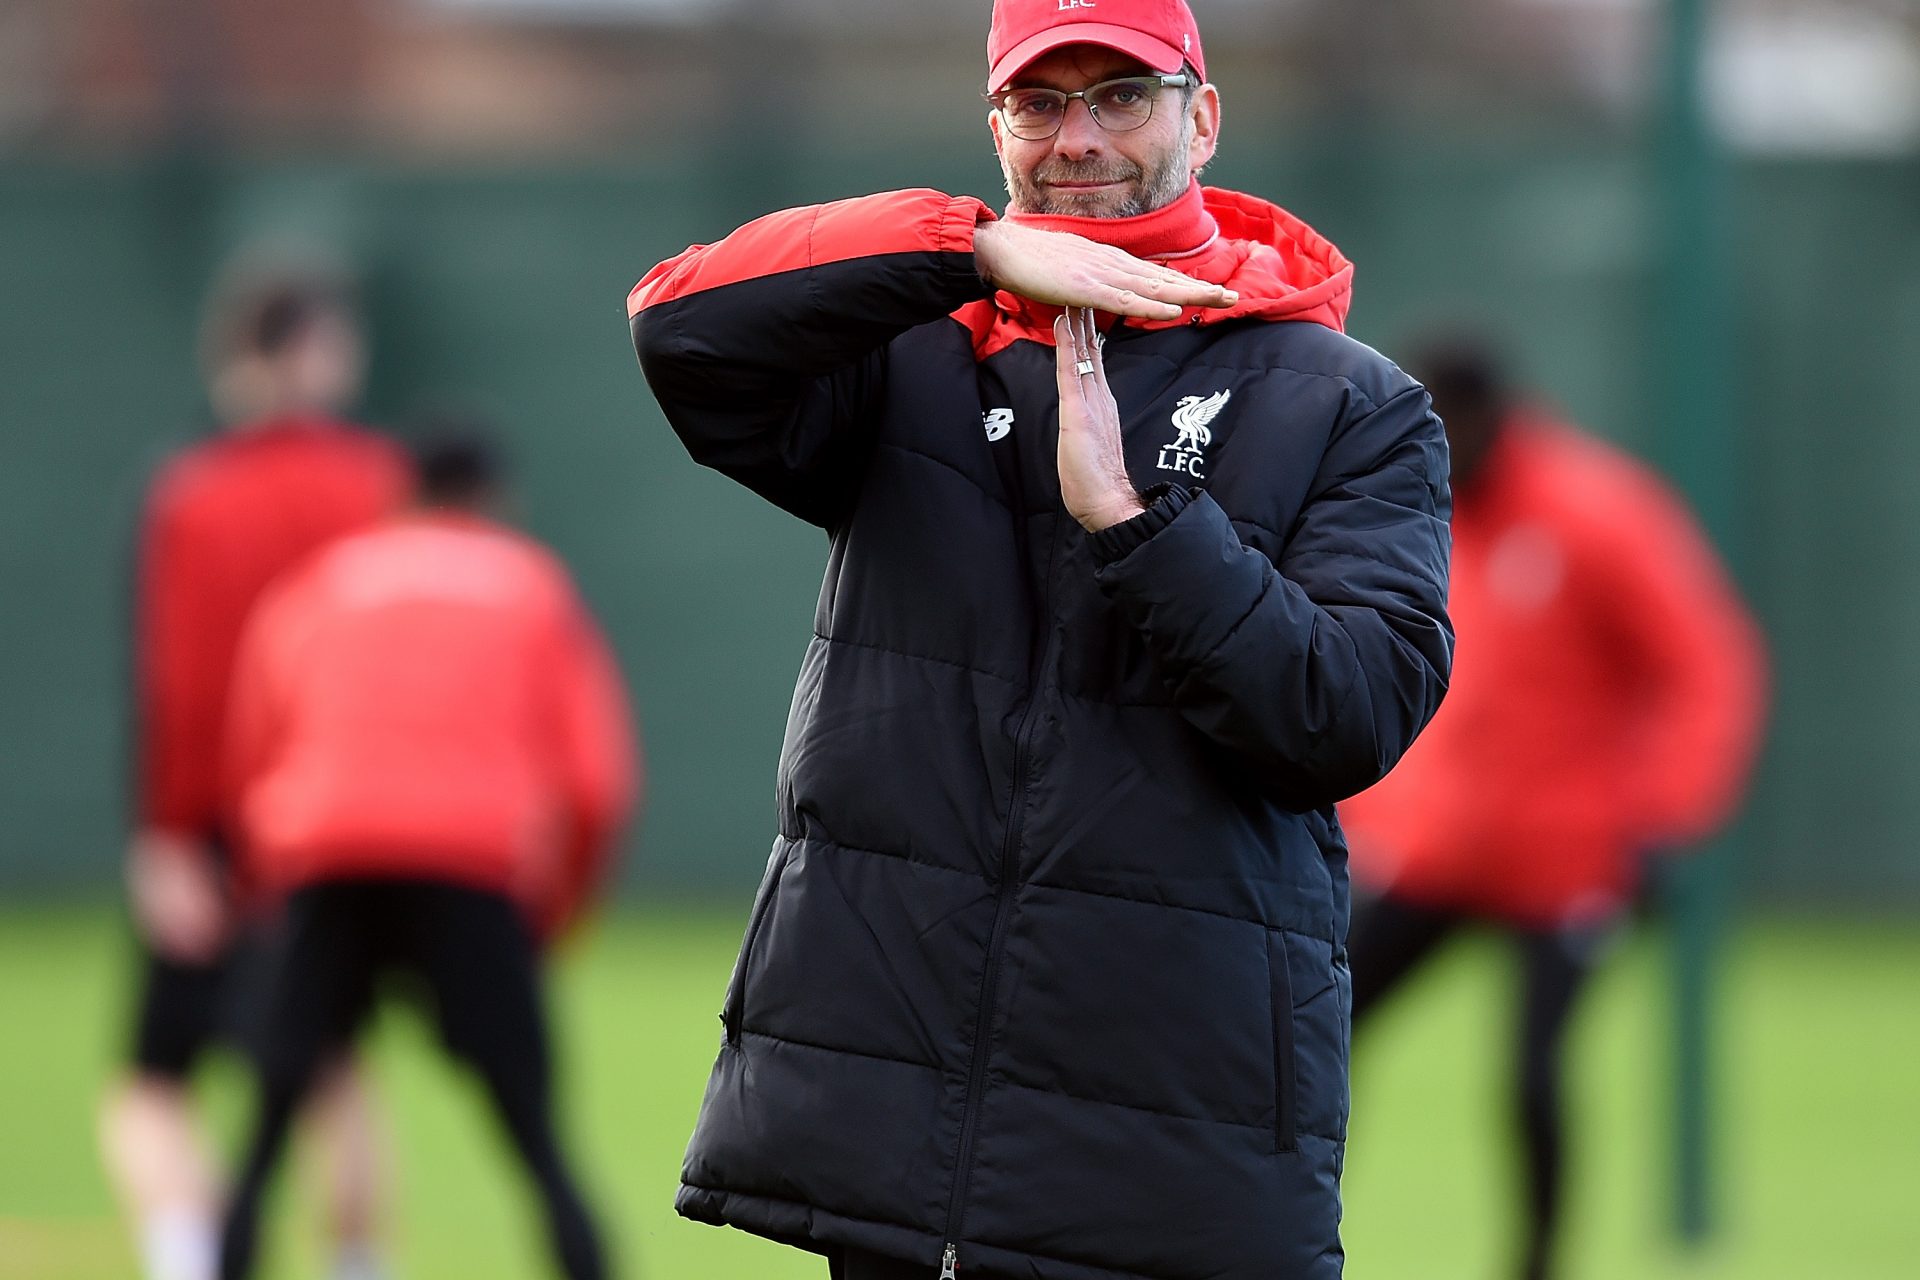 Jürgen Klopp leaves Liverpool: This is the 'real reason' for his departure